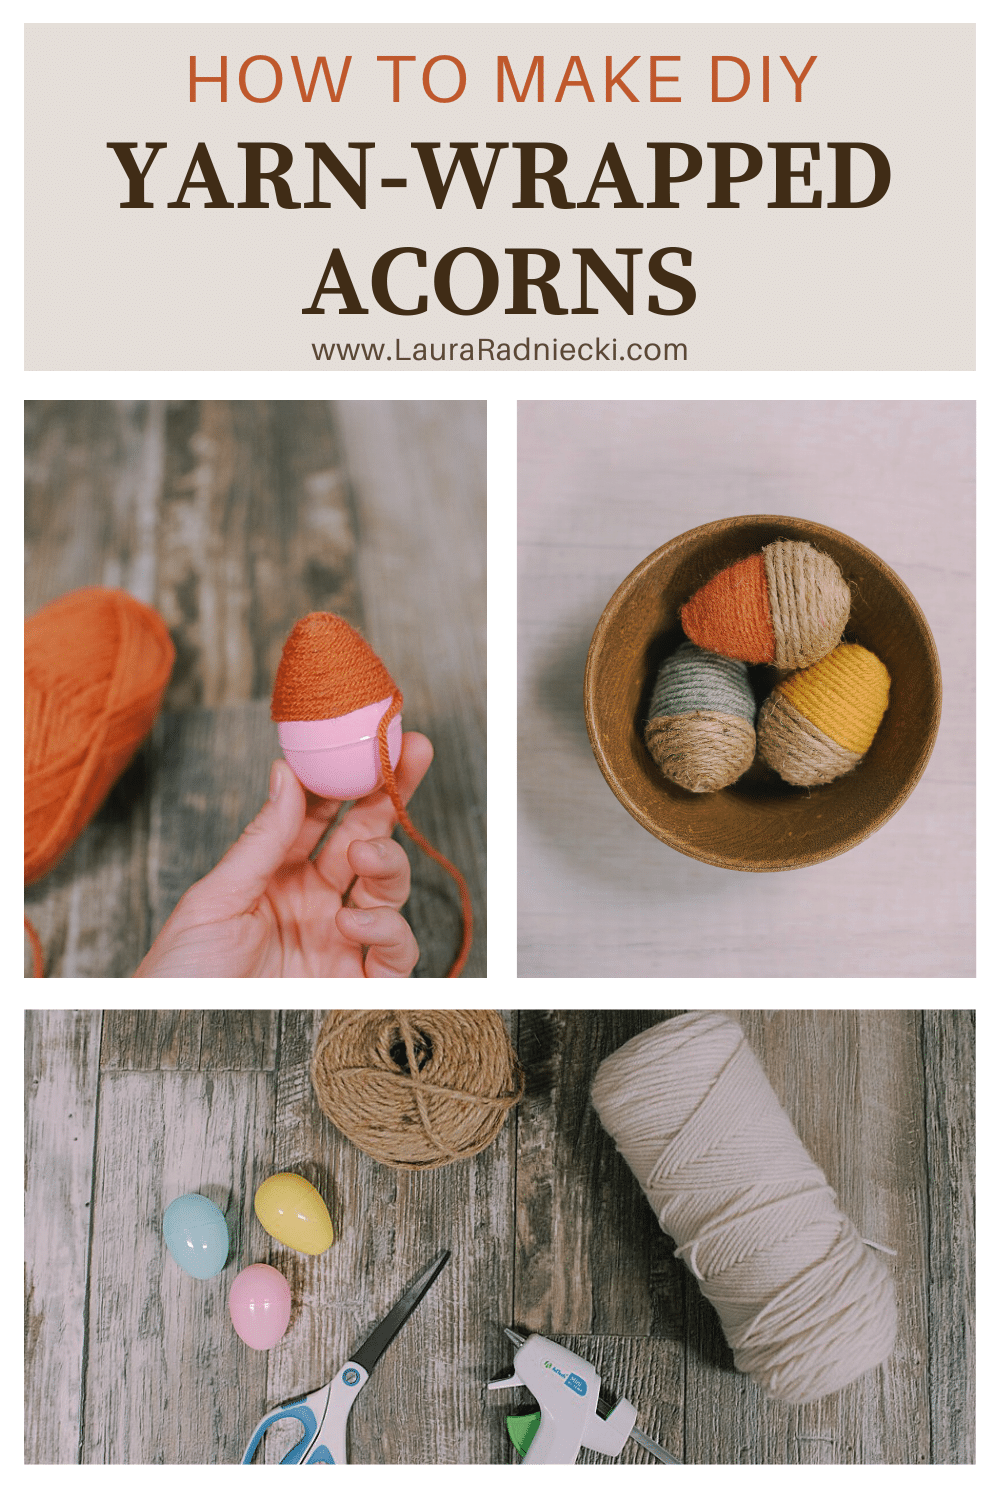 How to make DIY yarn-wrapped acorns made from plastic easter eggs